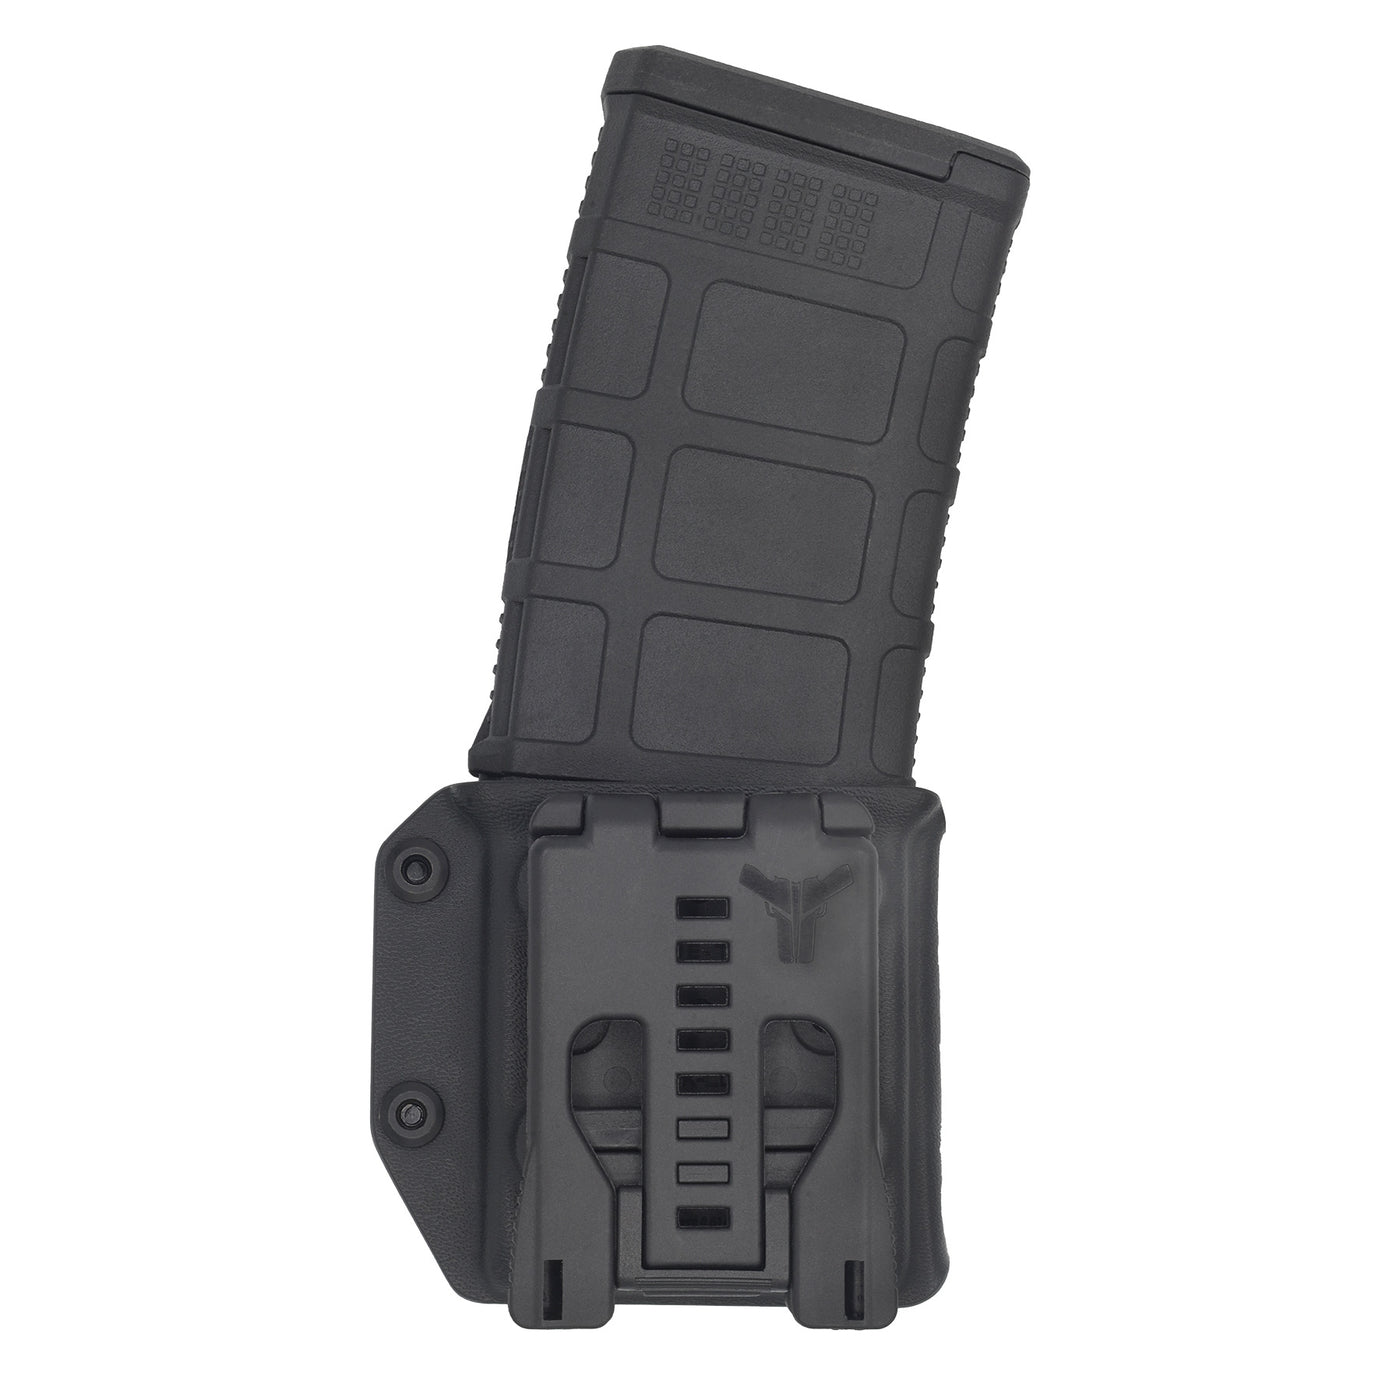 C&G Holsters quick ship kydex AR-15 rifle mag with mag back side